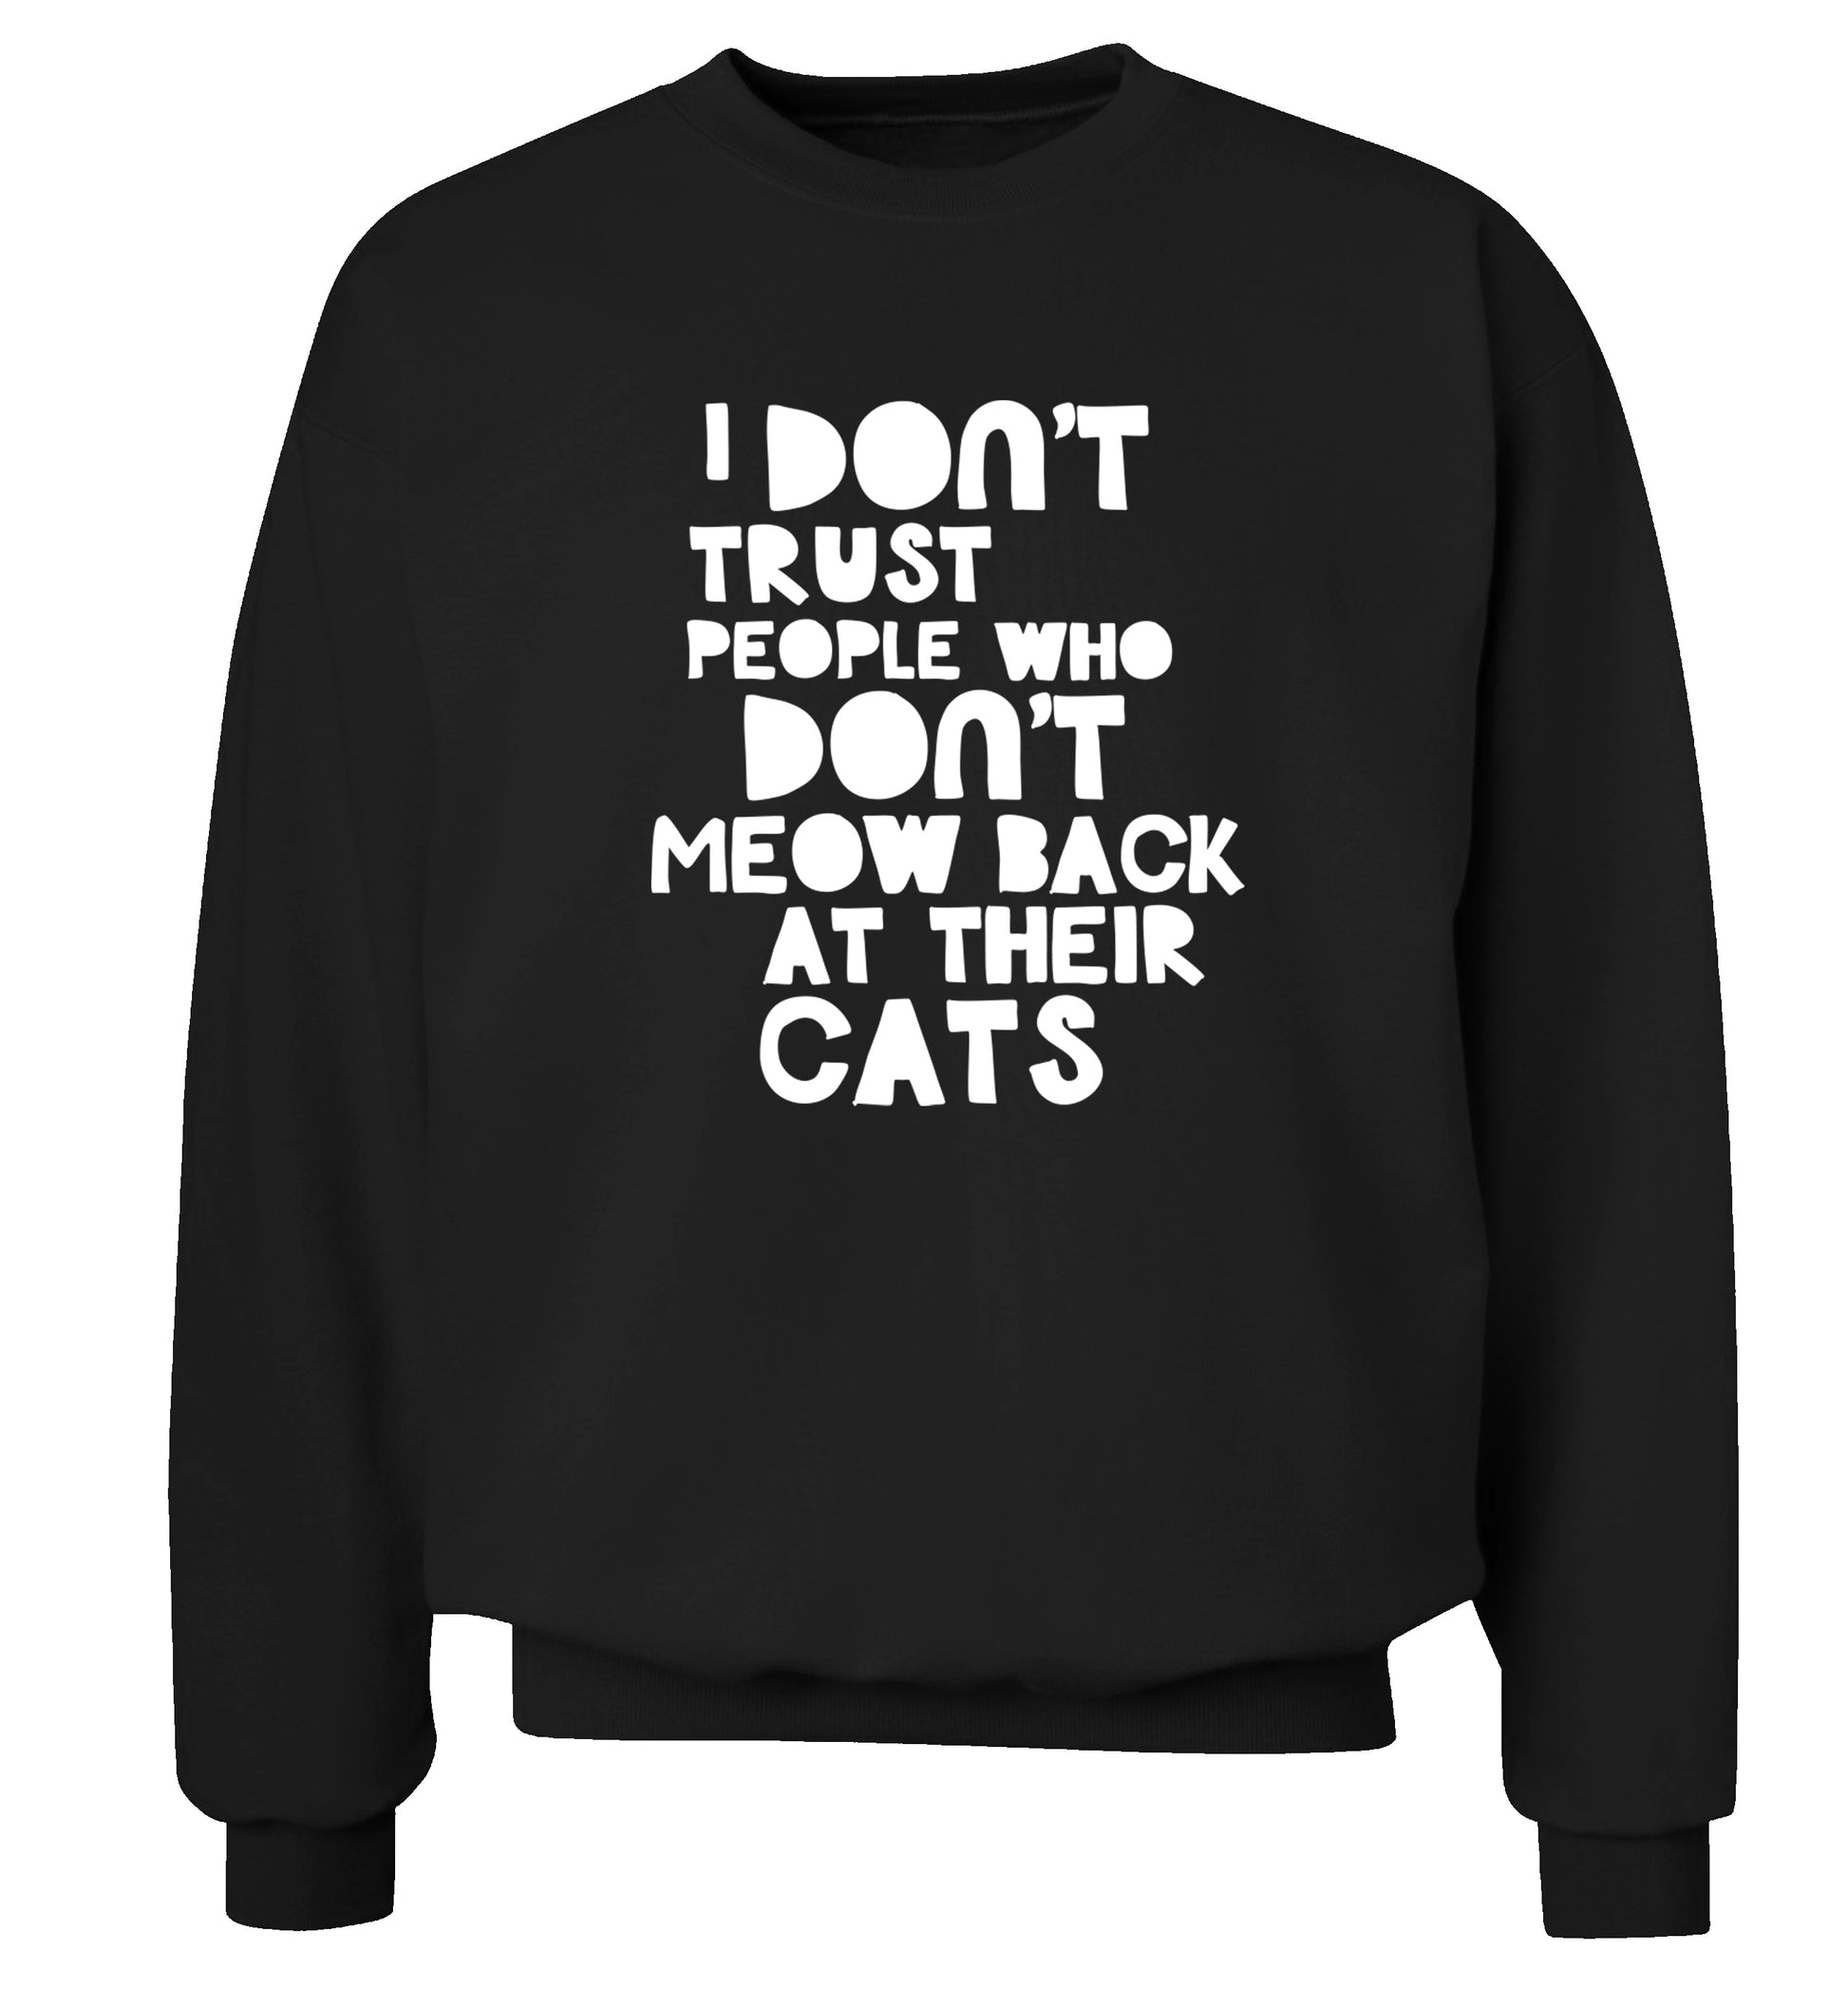 I don't trust people who don't meow back at their cats Adult's unisex black Sweater 2XL